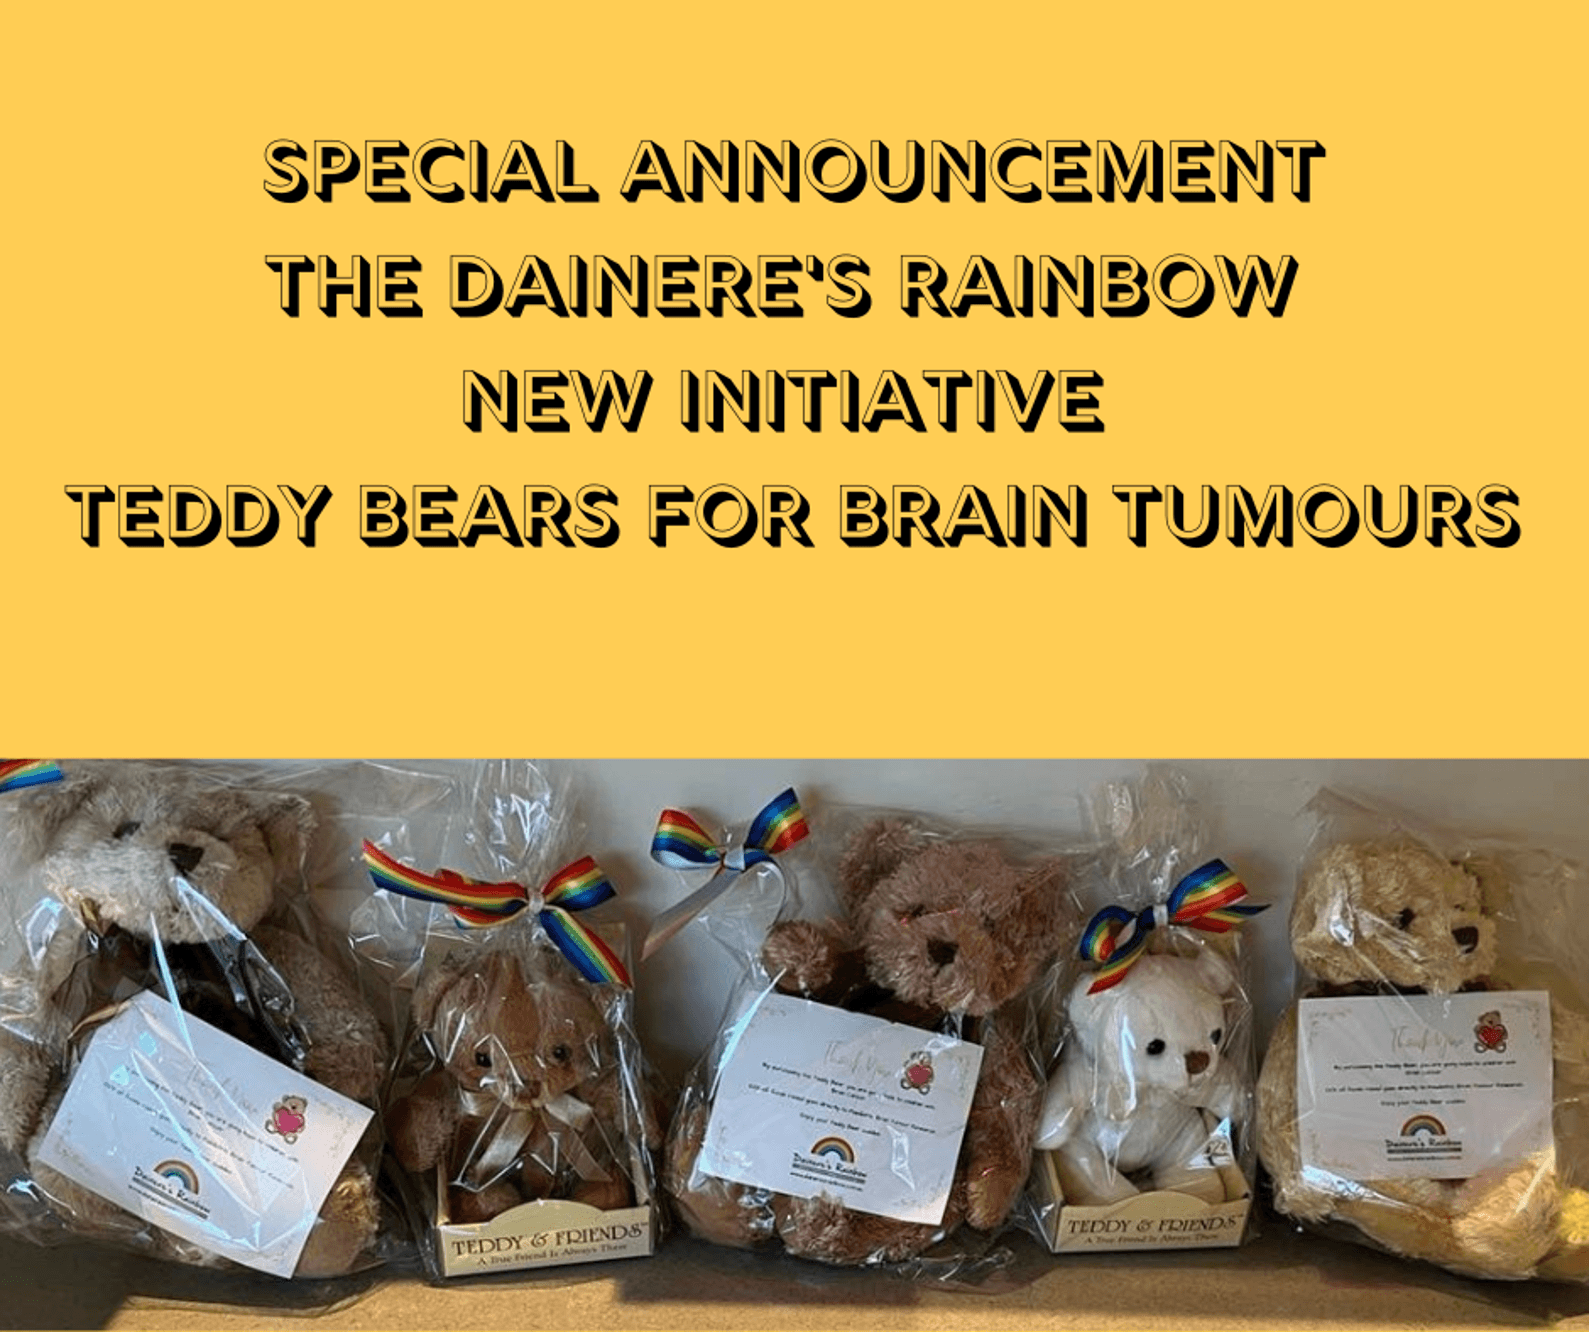 Teddy Bears For Brain Tumours Is A Beary Special New Awareness And Fundraising Initiative From The Dainere